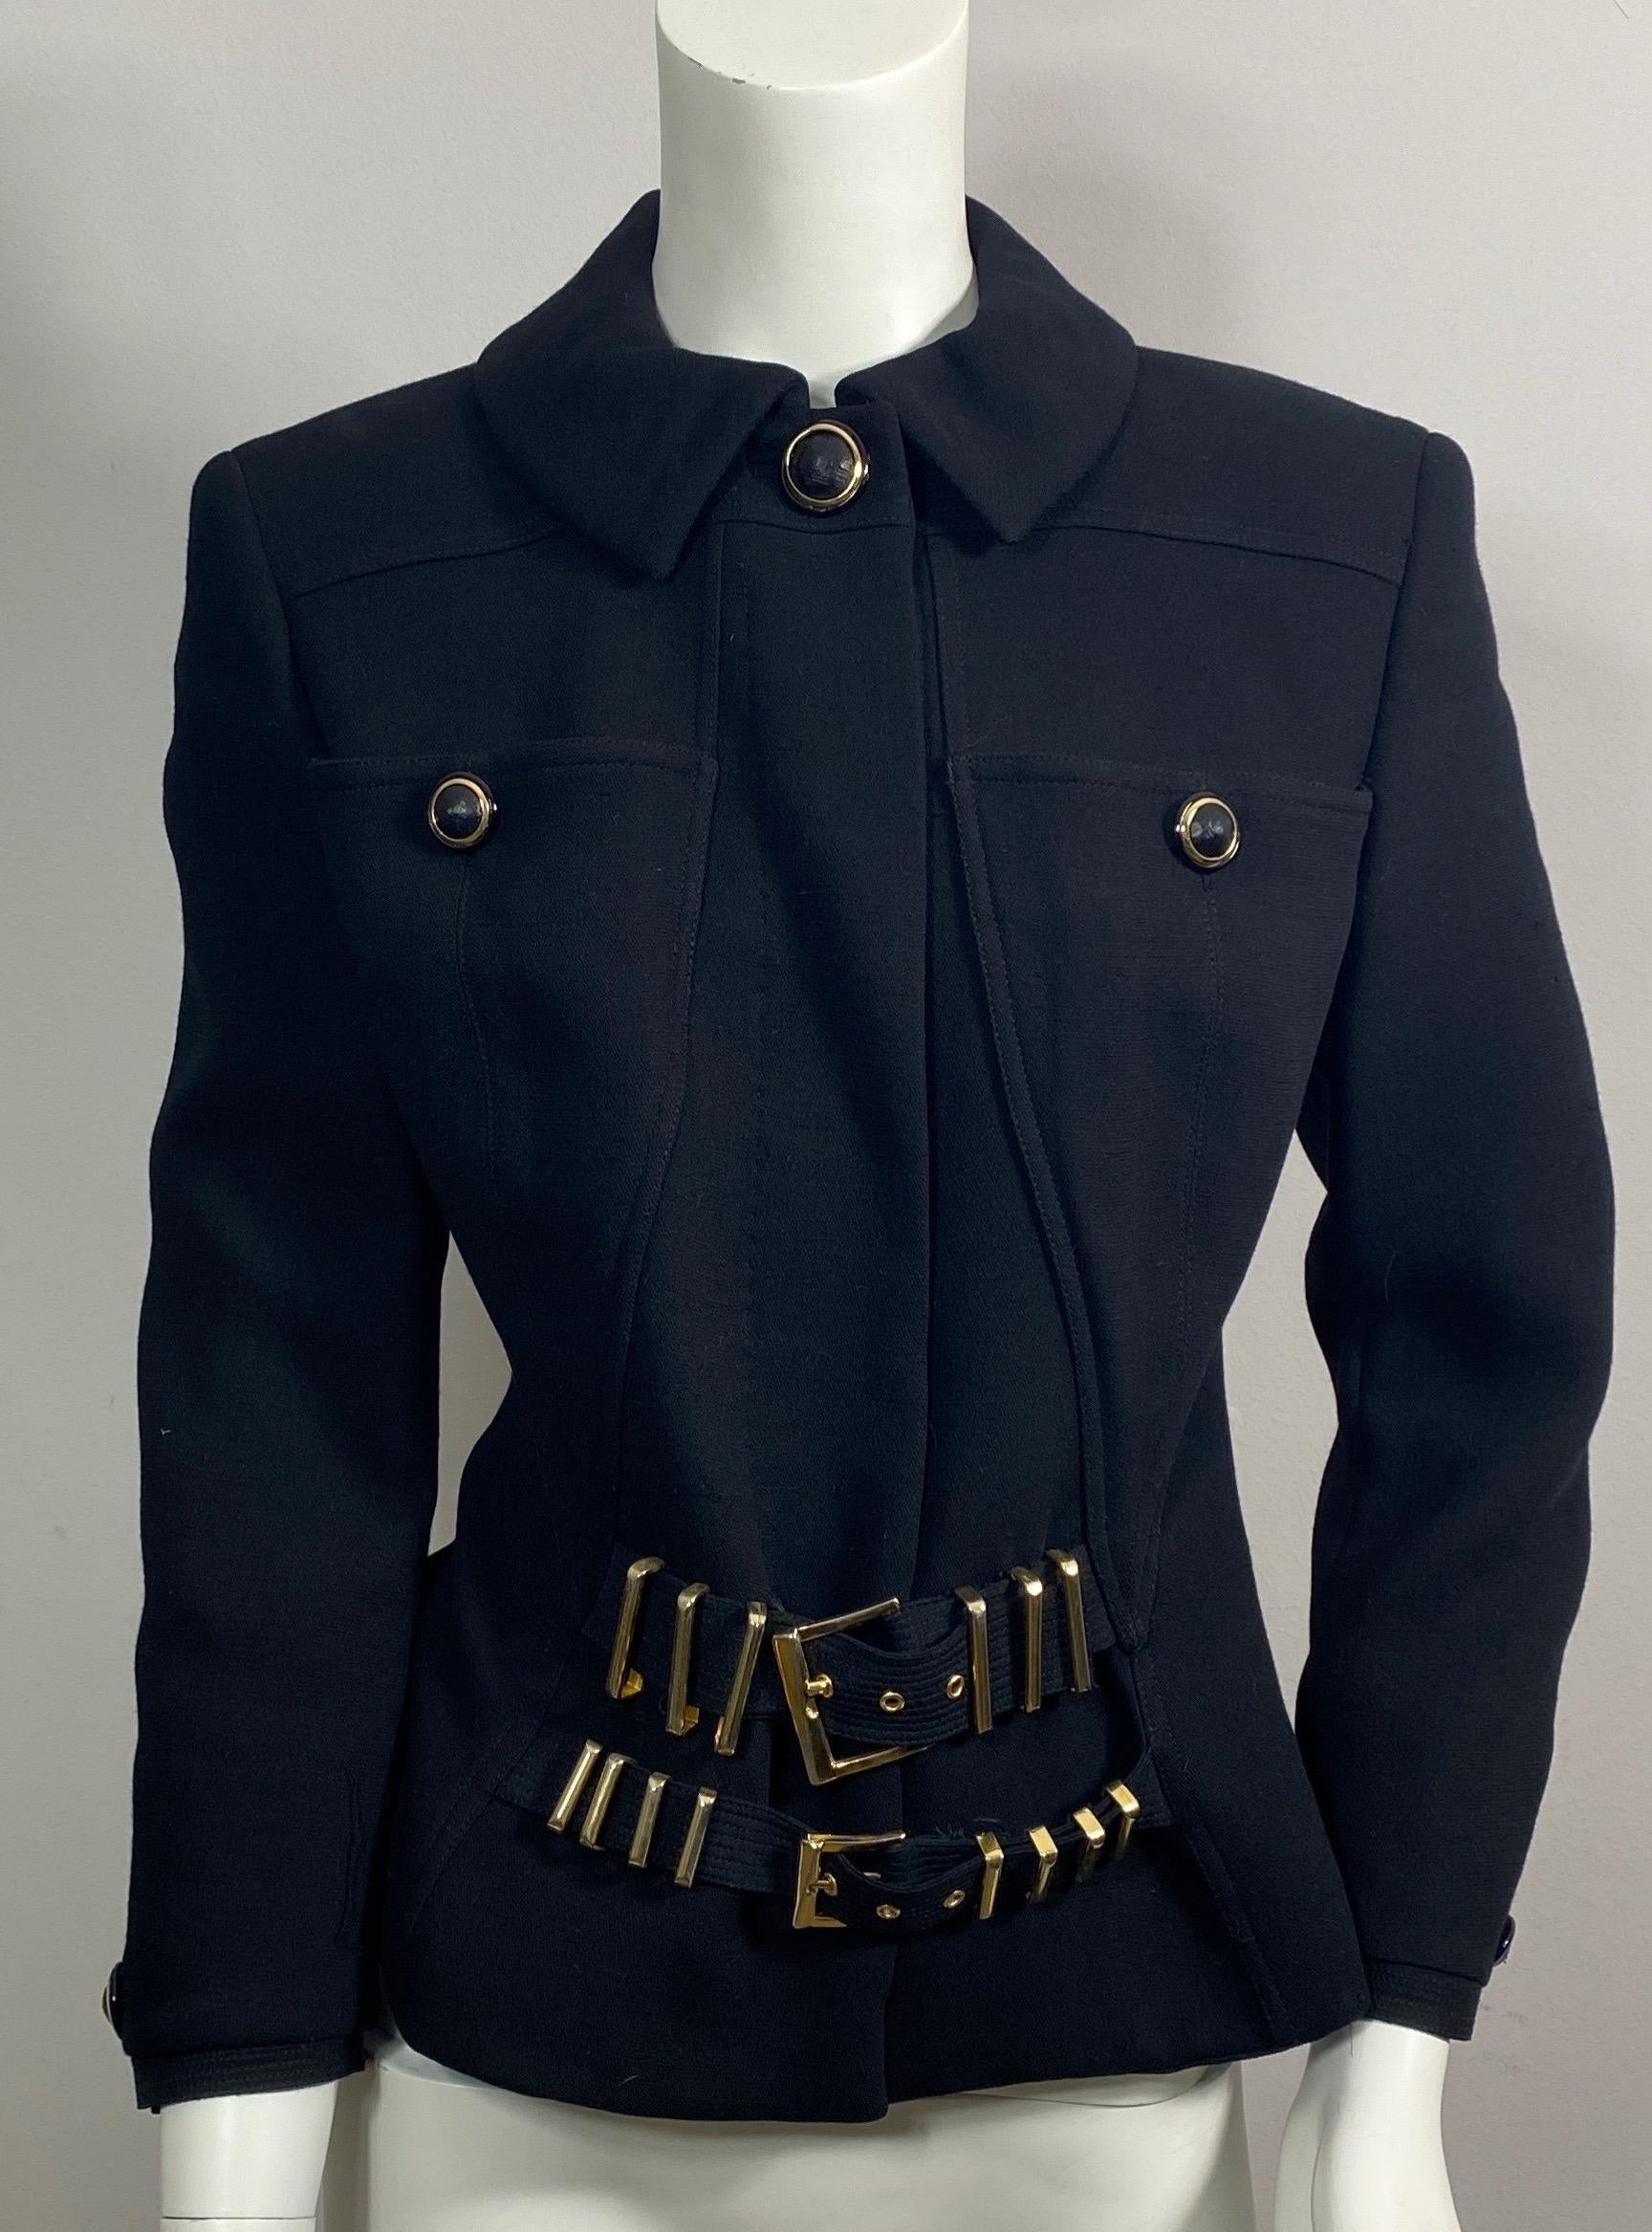 Gianni Versace Couture F/W 1992 Runway S&M Bondage Black Jacket-Size 6  This very collectible Versace Couture Jacket is from one of his most famous collections. The chic semi crop jacket debuted as look 23 on the runway for the F/W 1992 collection,